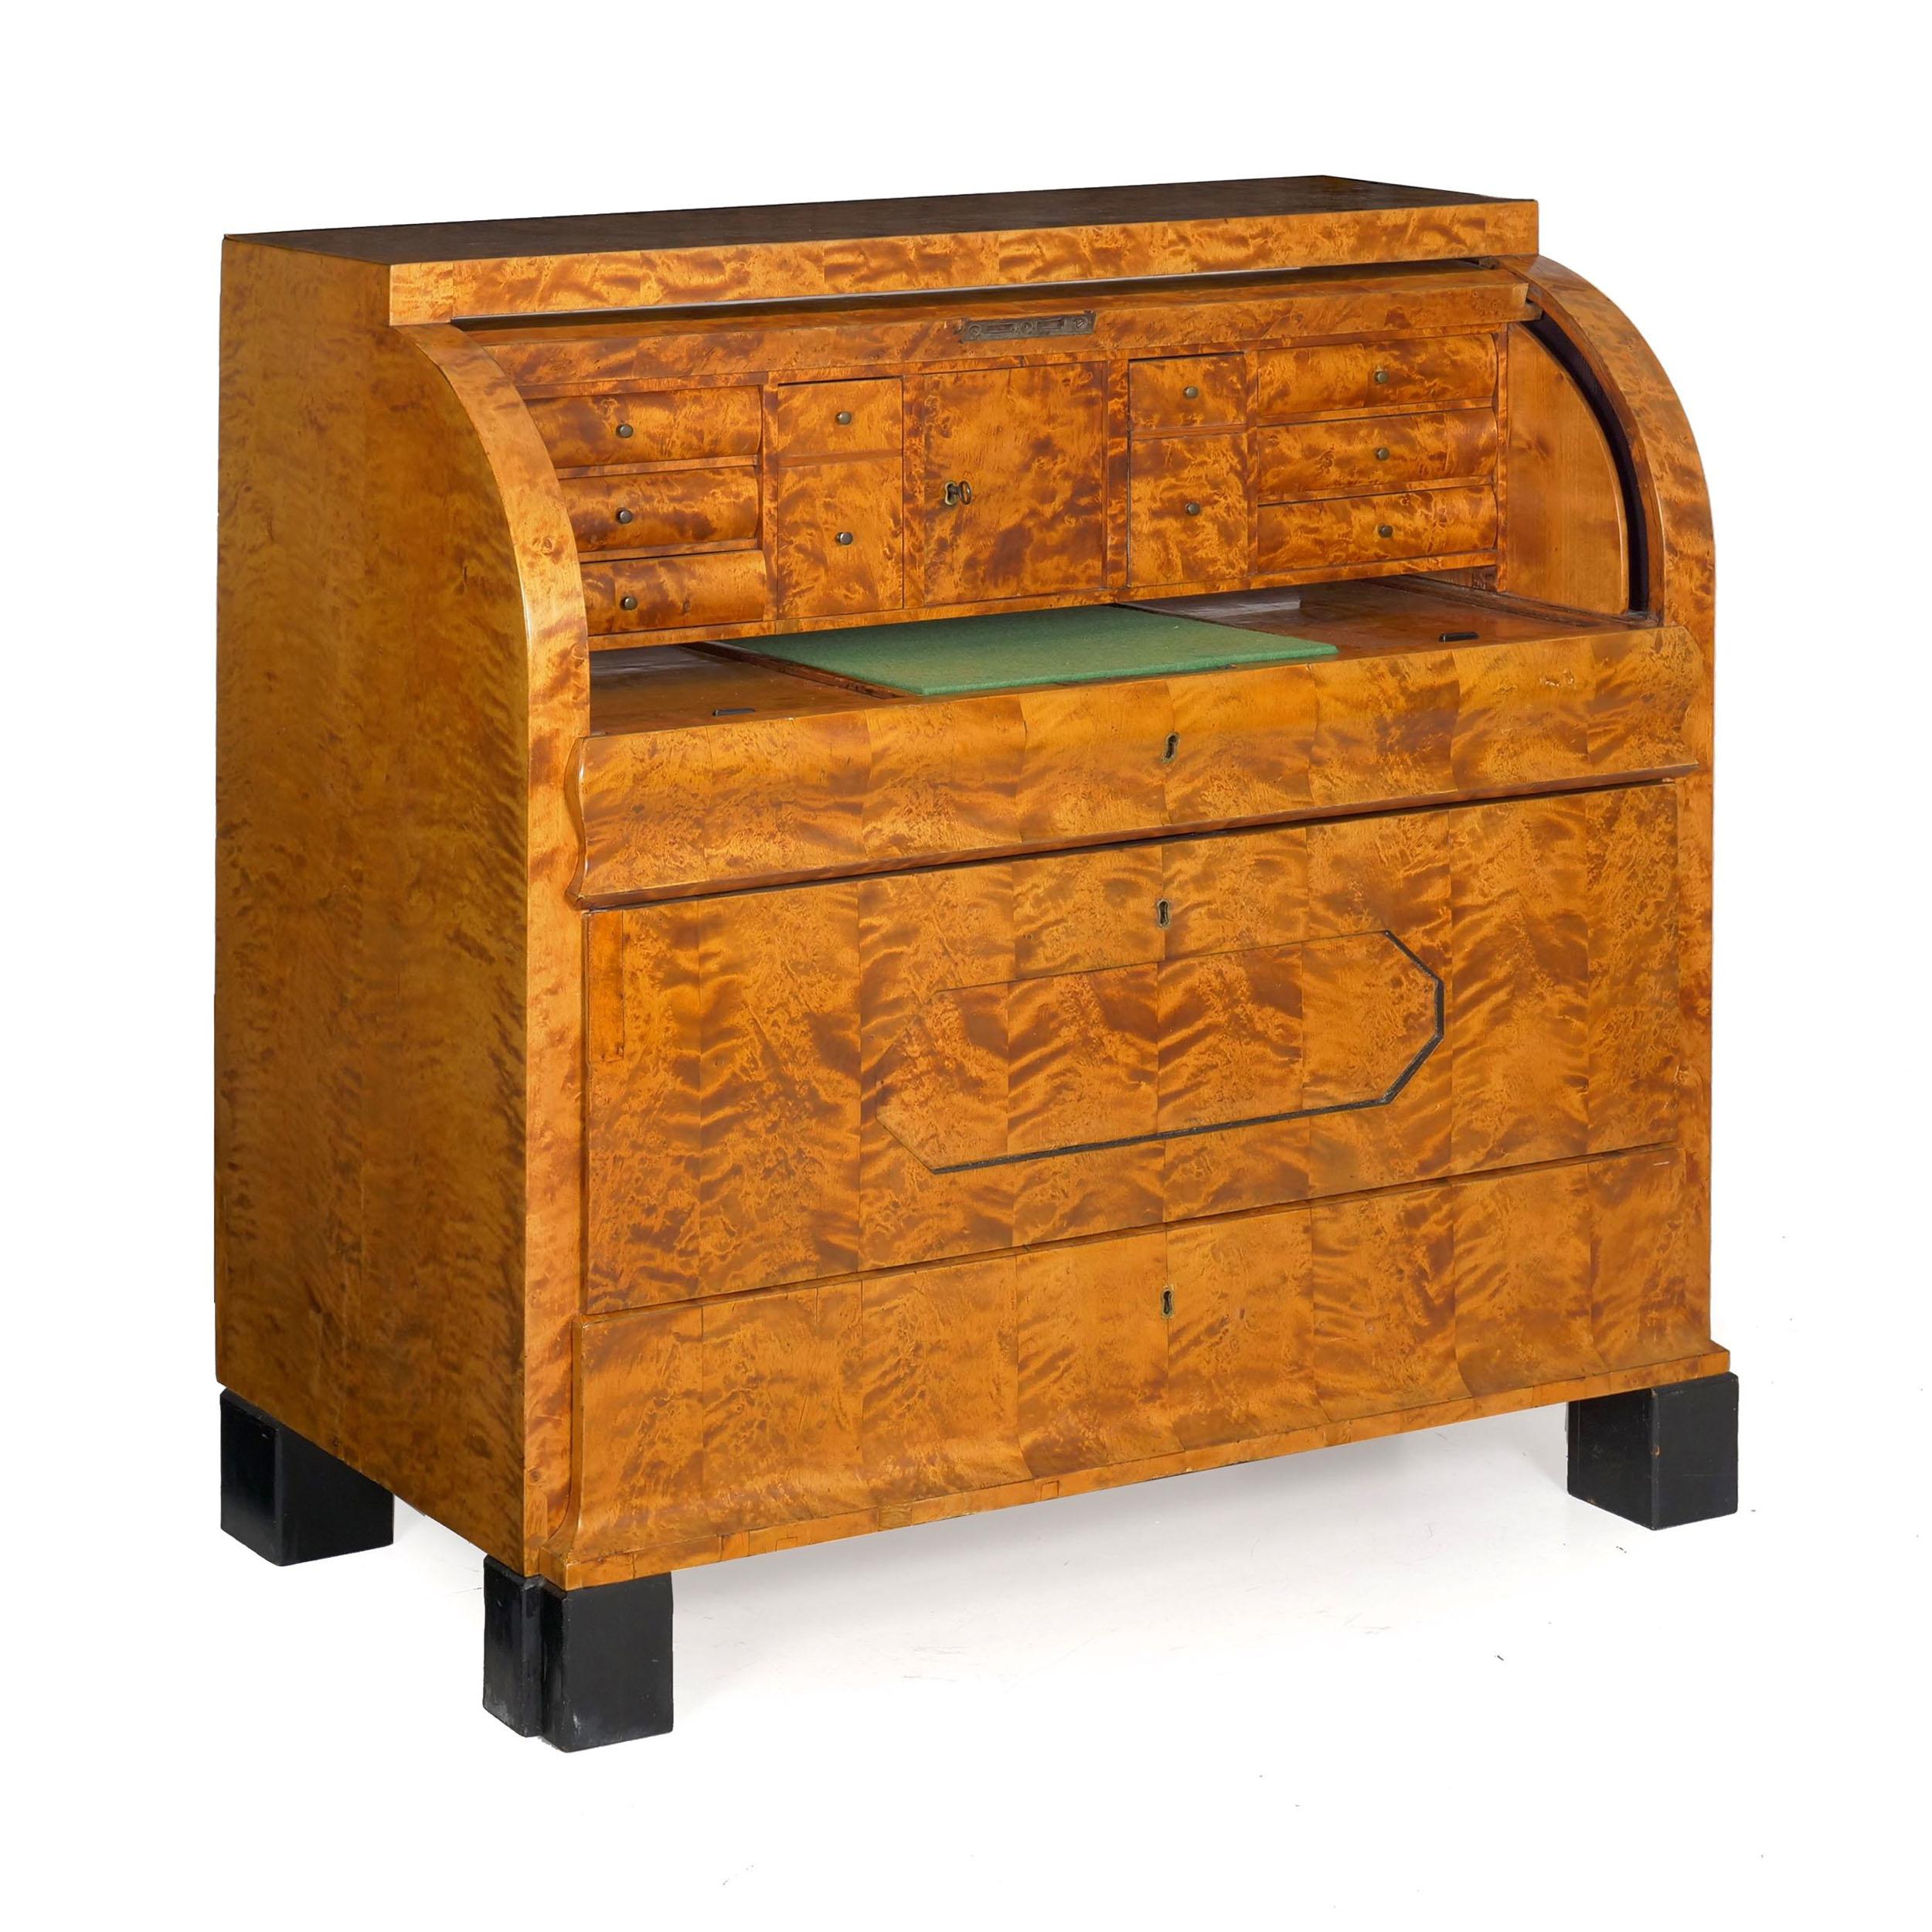 Biedermeier figured maple roll-top desk
Austrian, circa 1830-1850
Item # 007HQP30L

With rich and vibrant figured-maple veneers throughout, this fine Biedermeier writing desk features a rolling top that opens to reveal a series of six broader